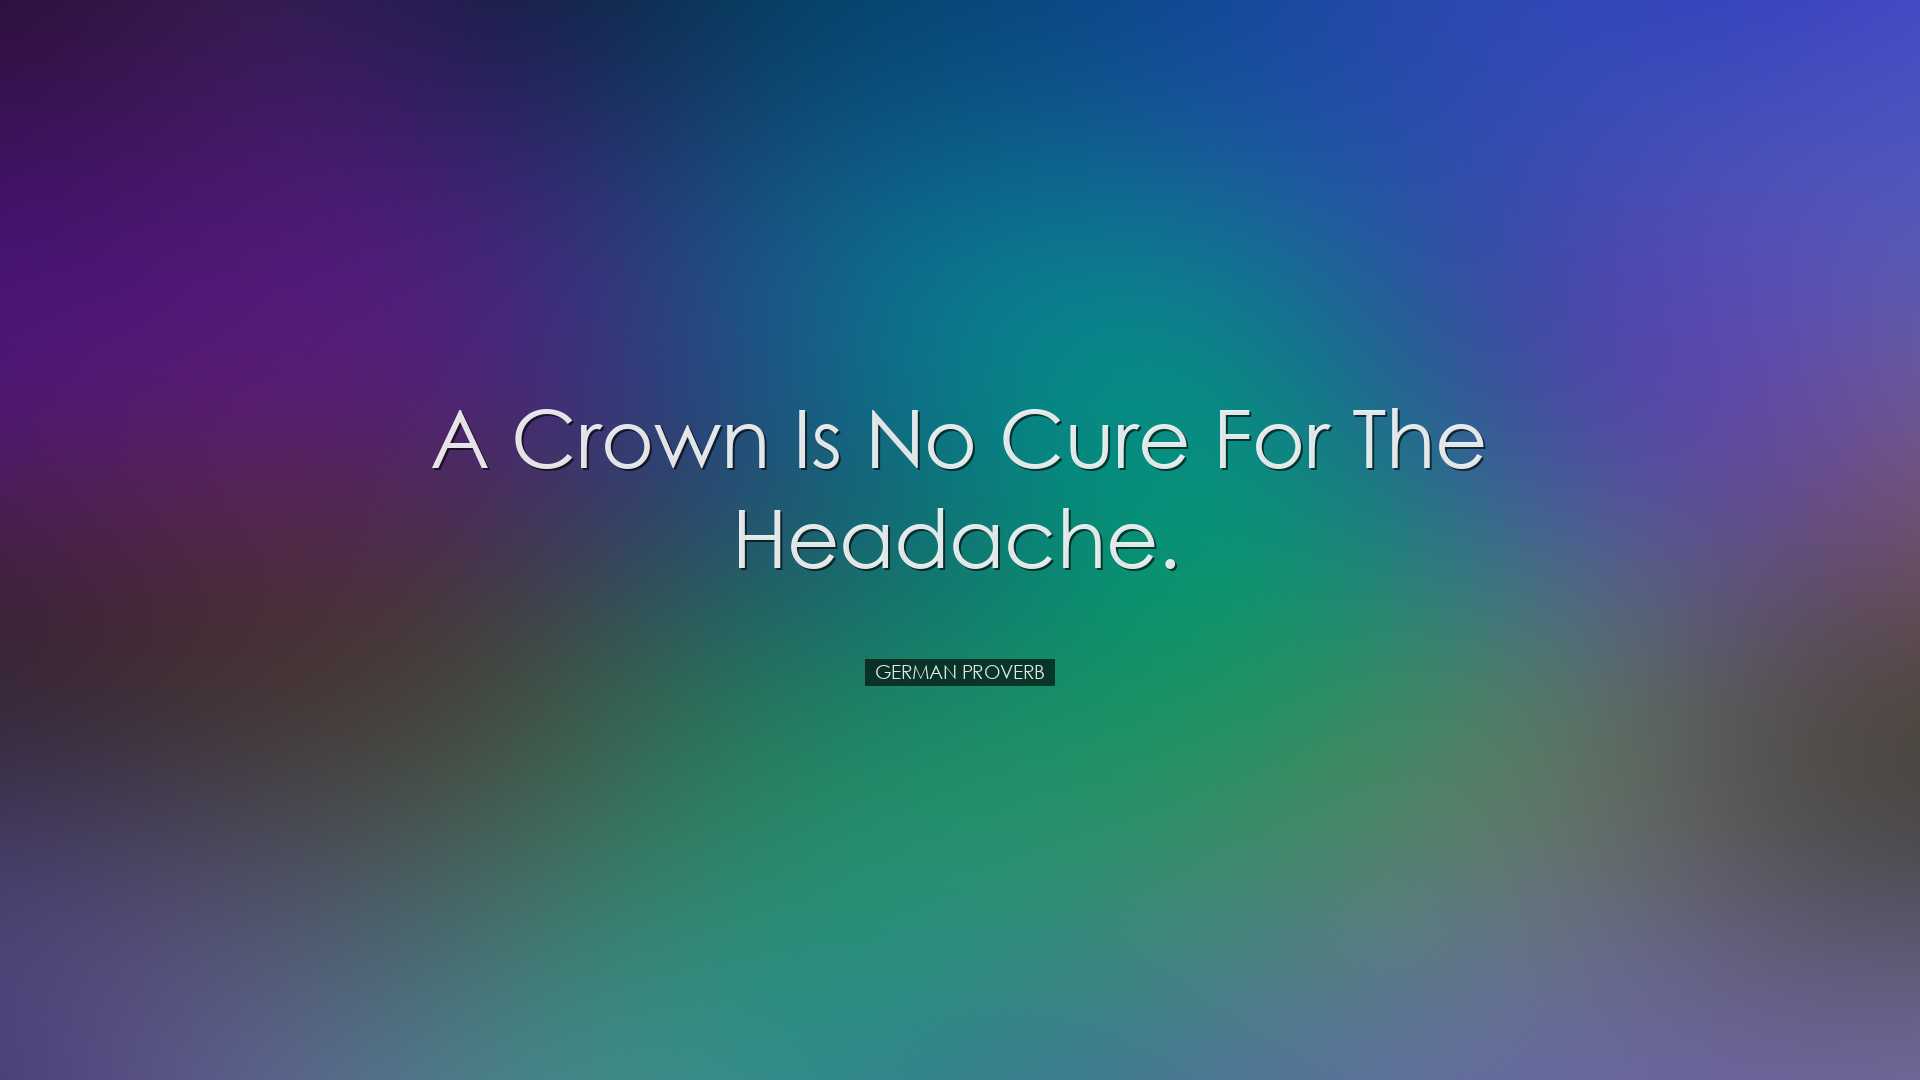 A crown is no cure for the headache. - German Proverb